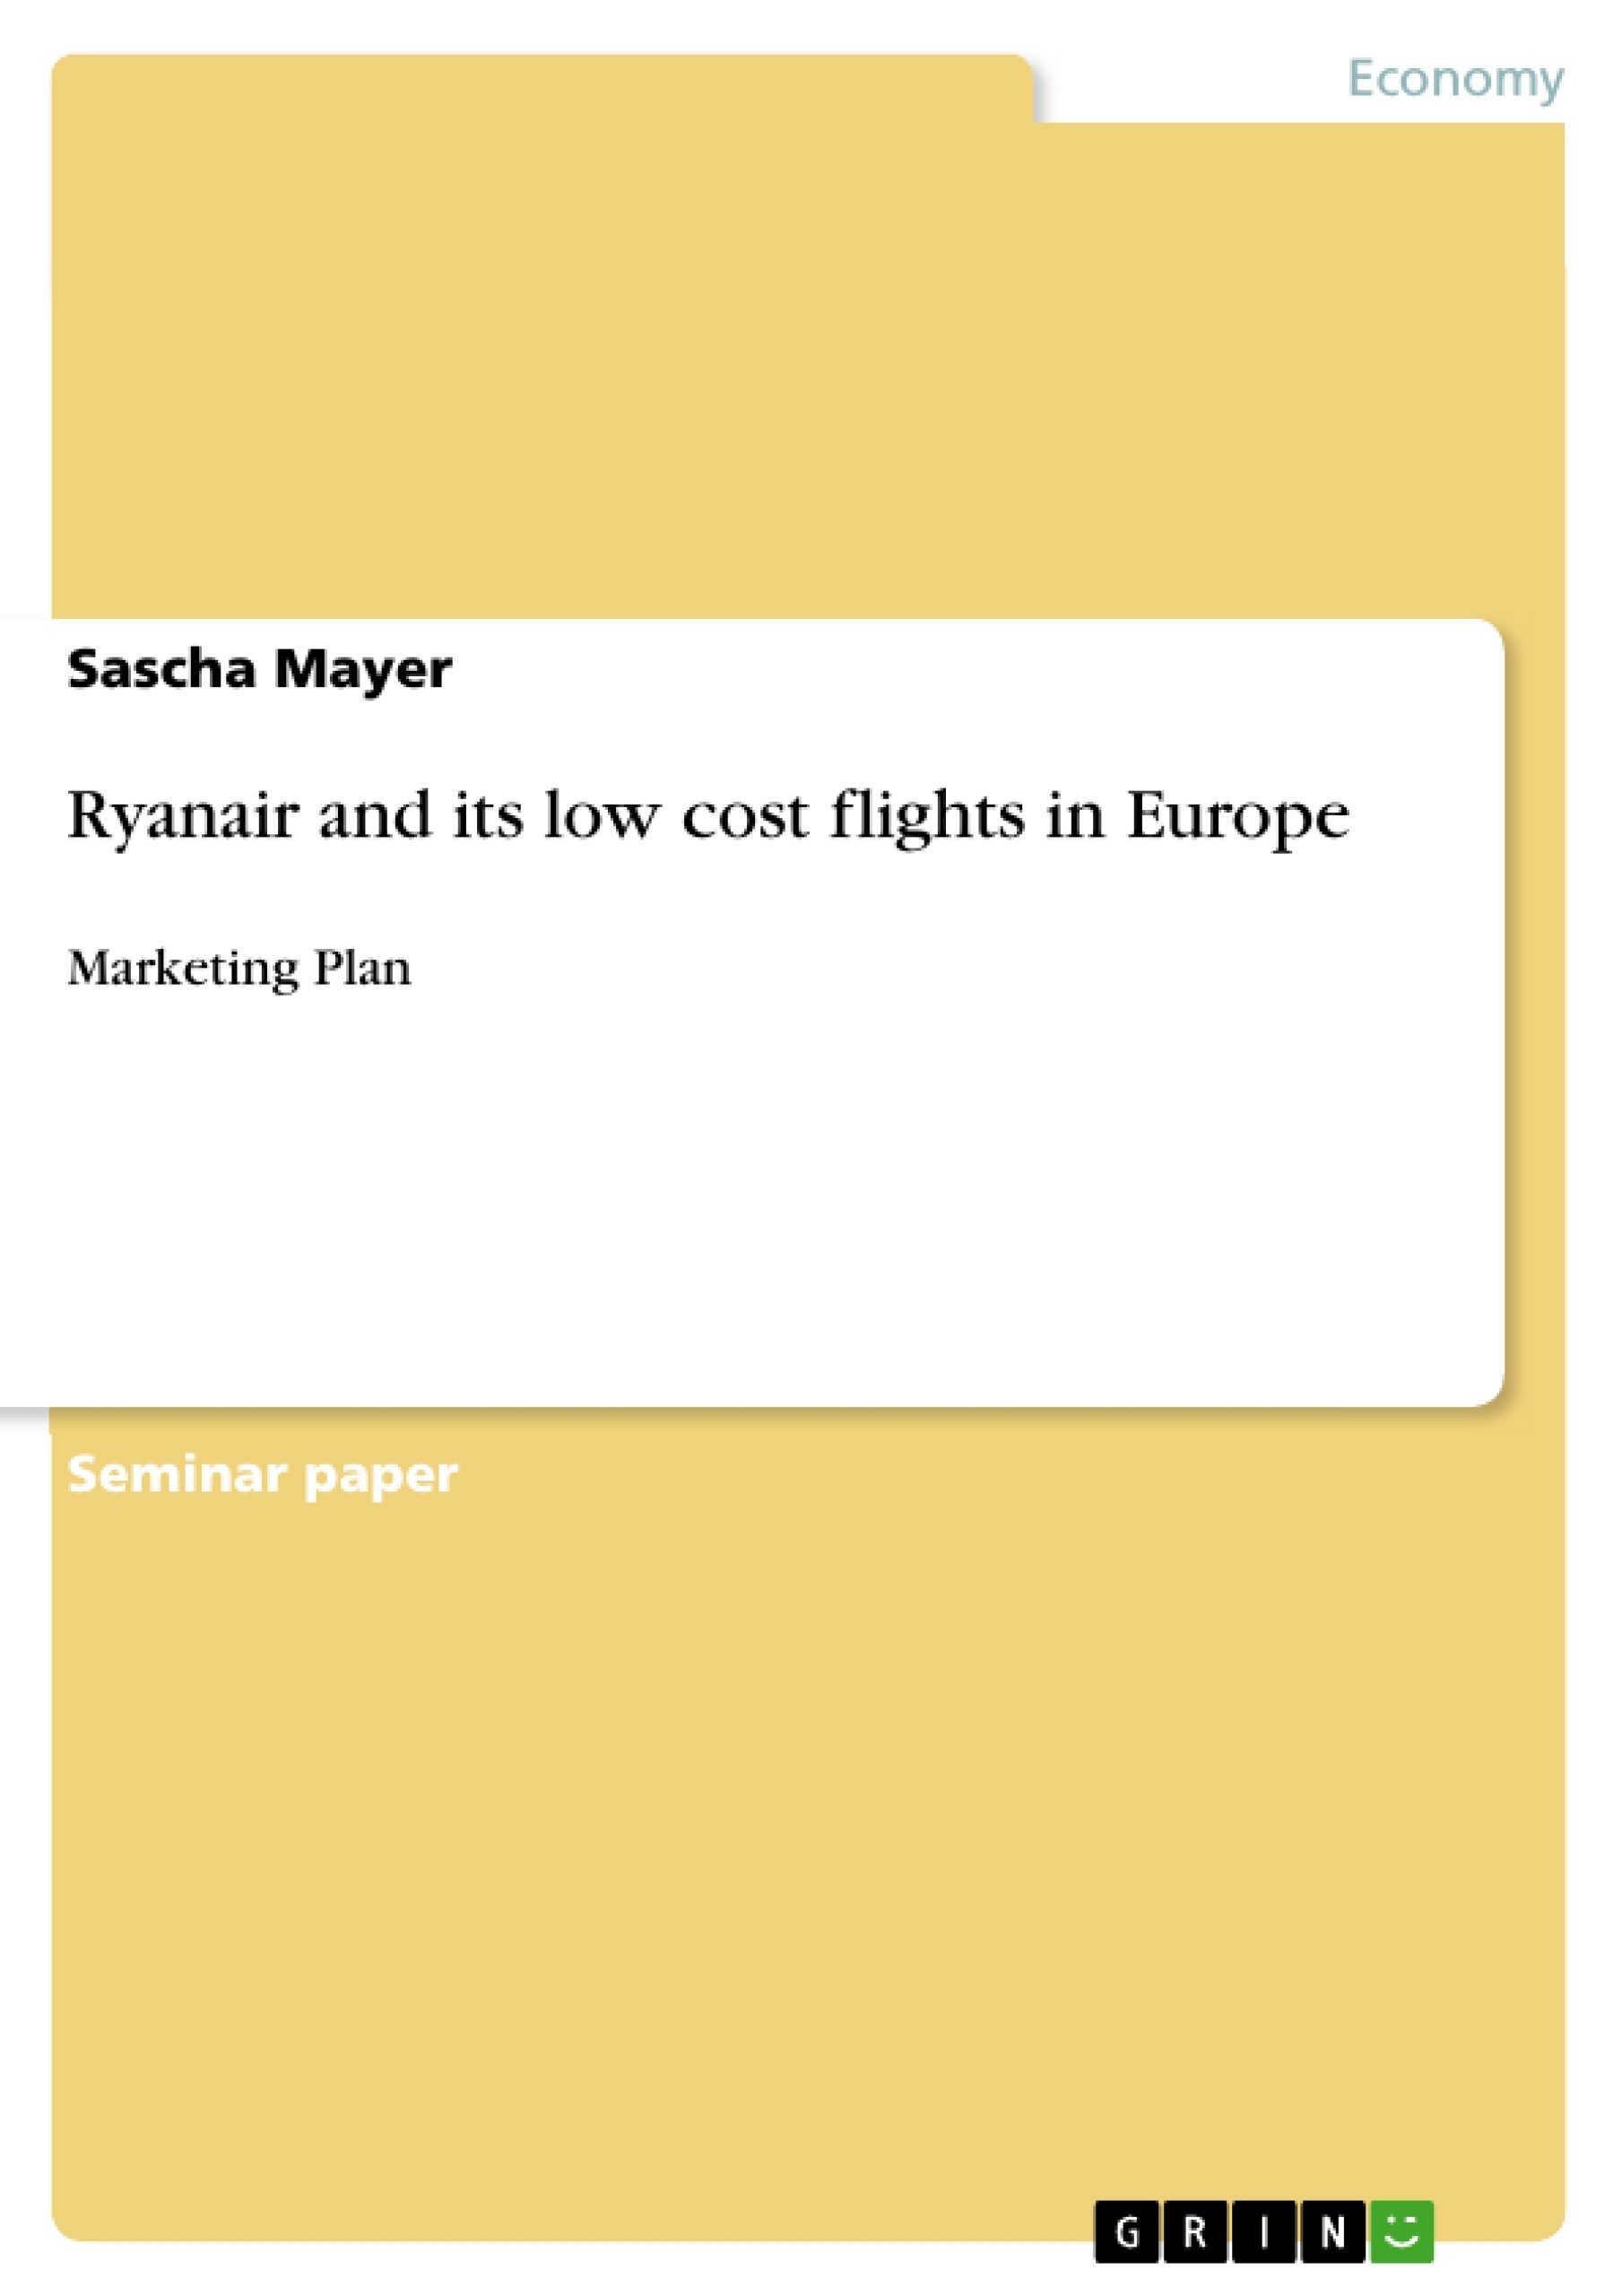 Ryanair Aims And Objectives